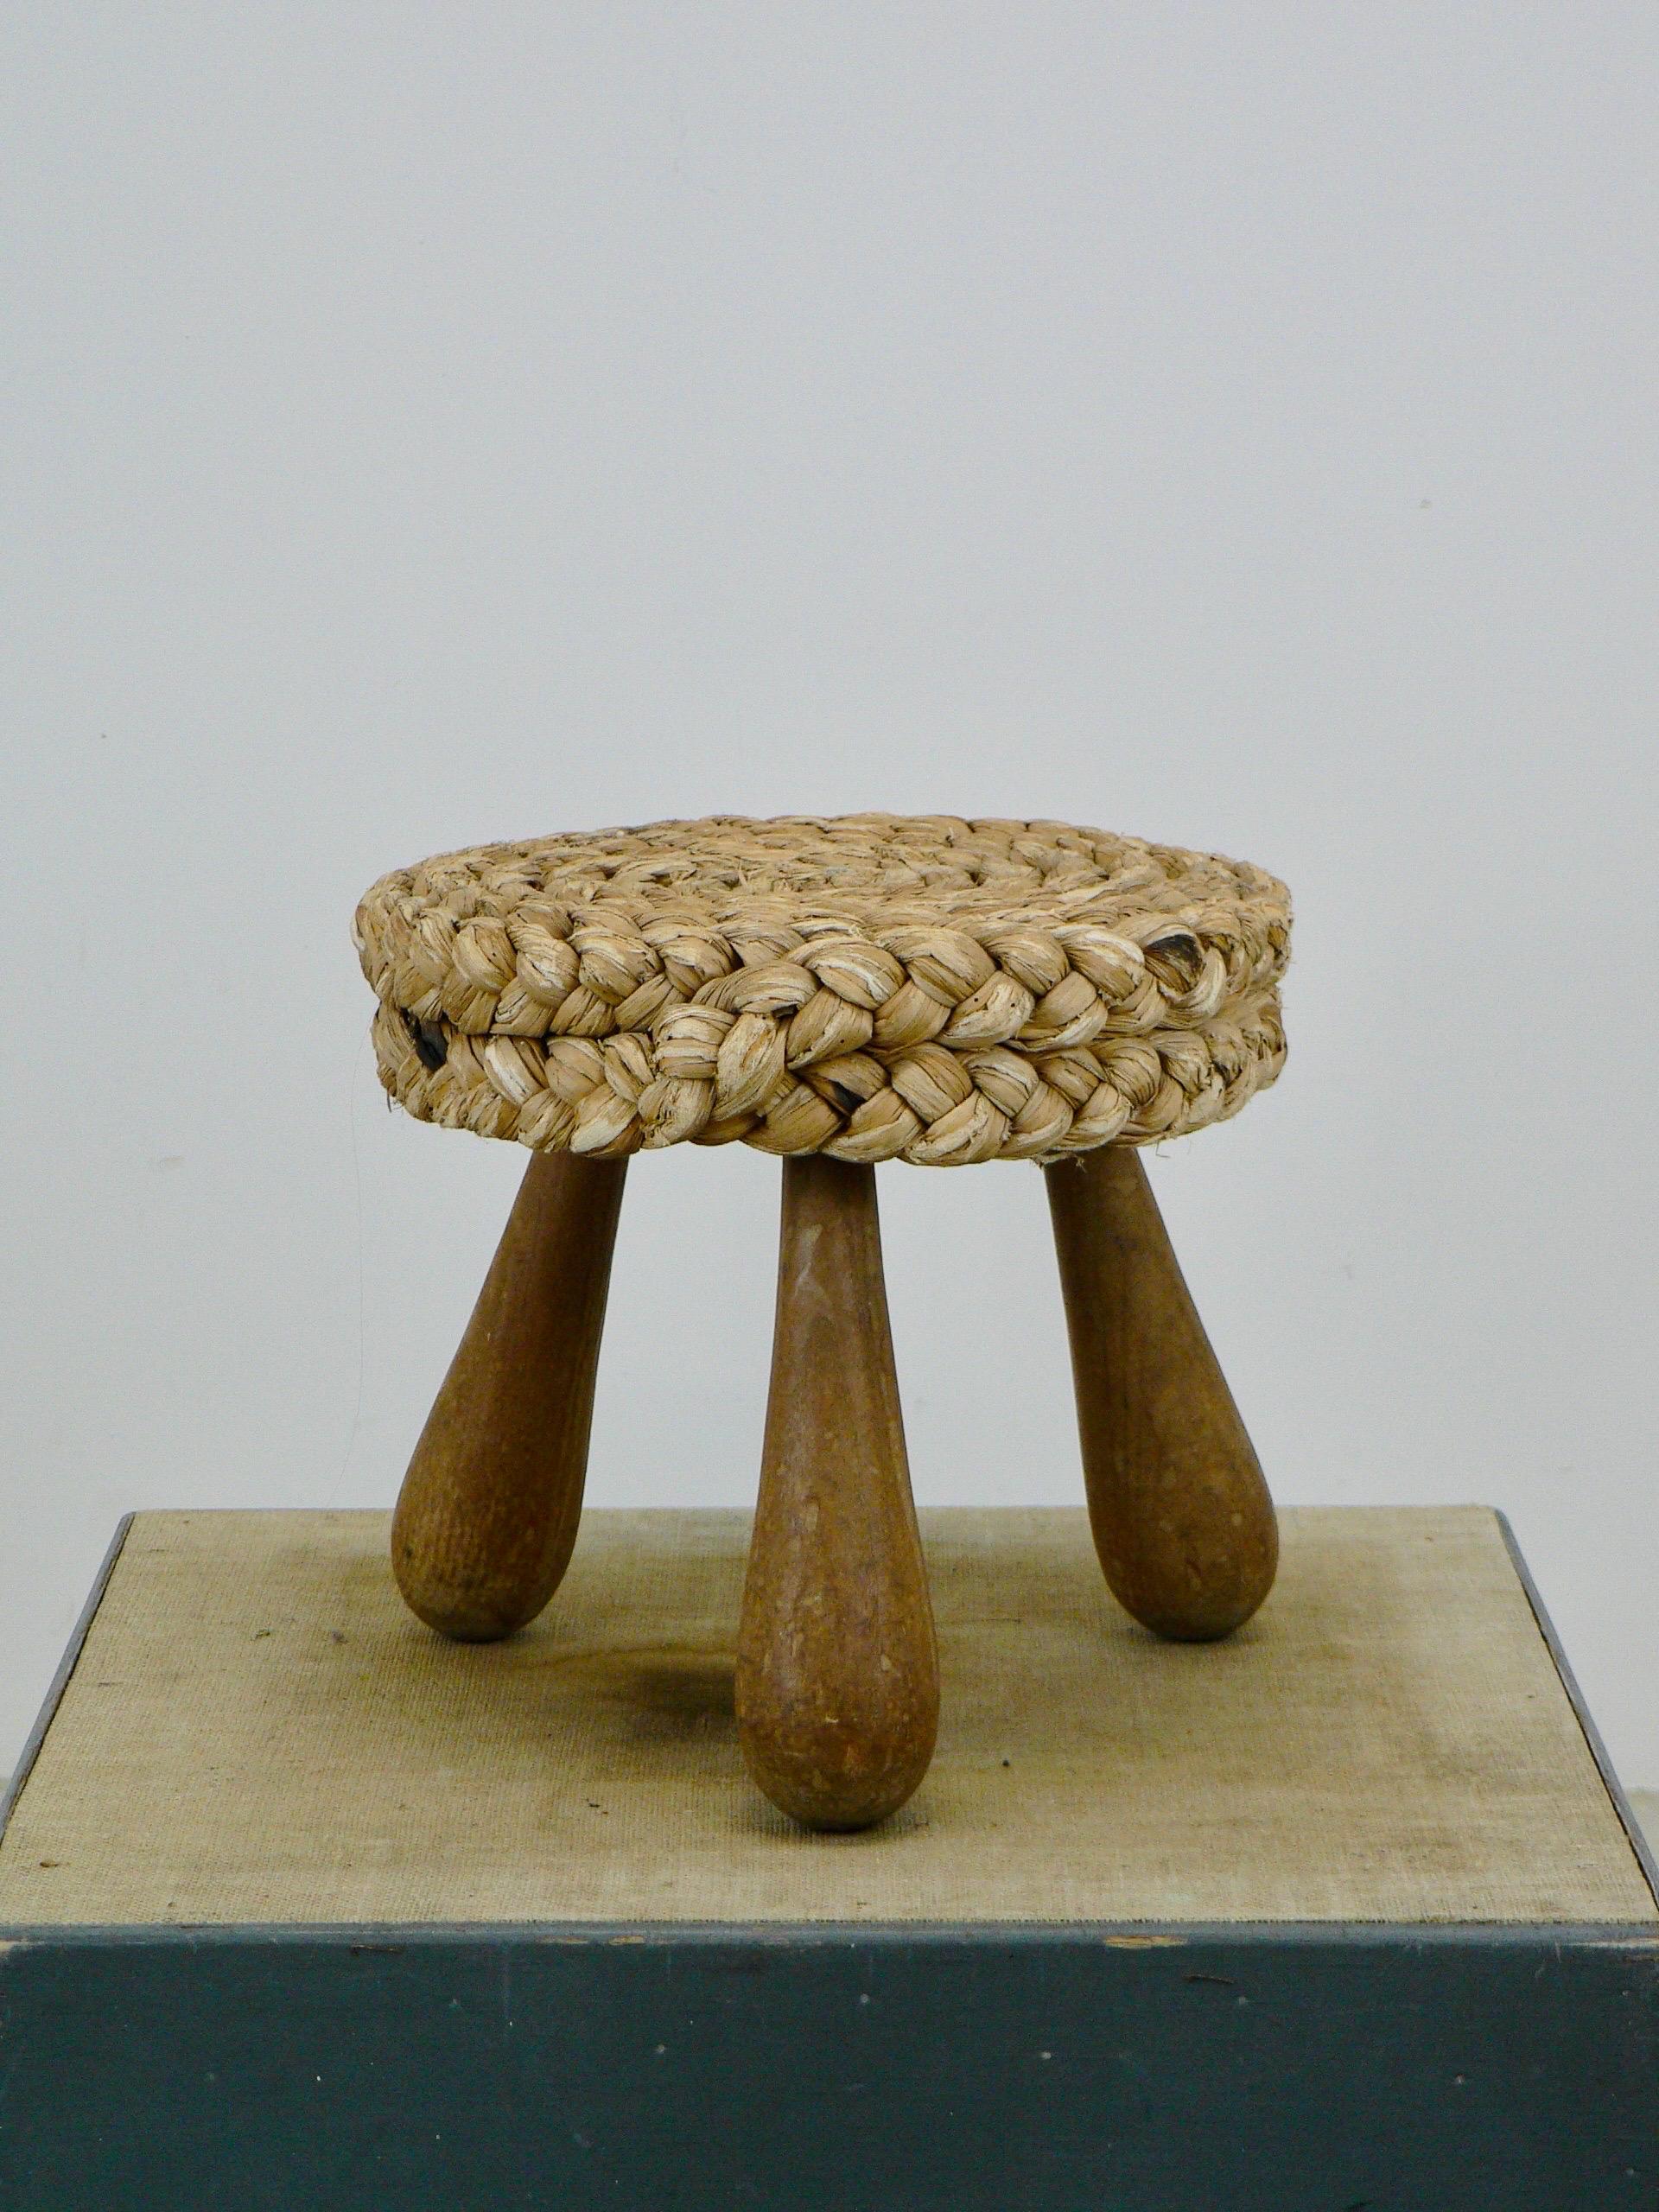 Mid-century French low Shepard's stool designed by Adrien Audoux and Frida Minet. This rustic French pouf showcases a circular seat crafted from woven raffia/rattan, supported by tripod legs and an oak keel base. Maintaining its original condition.